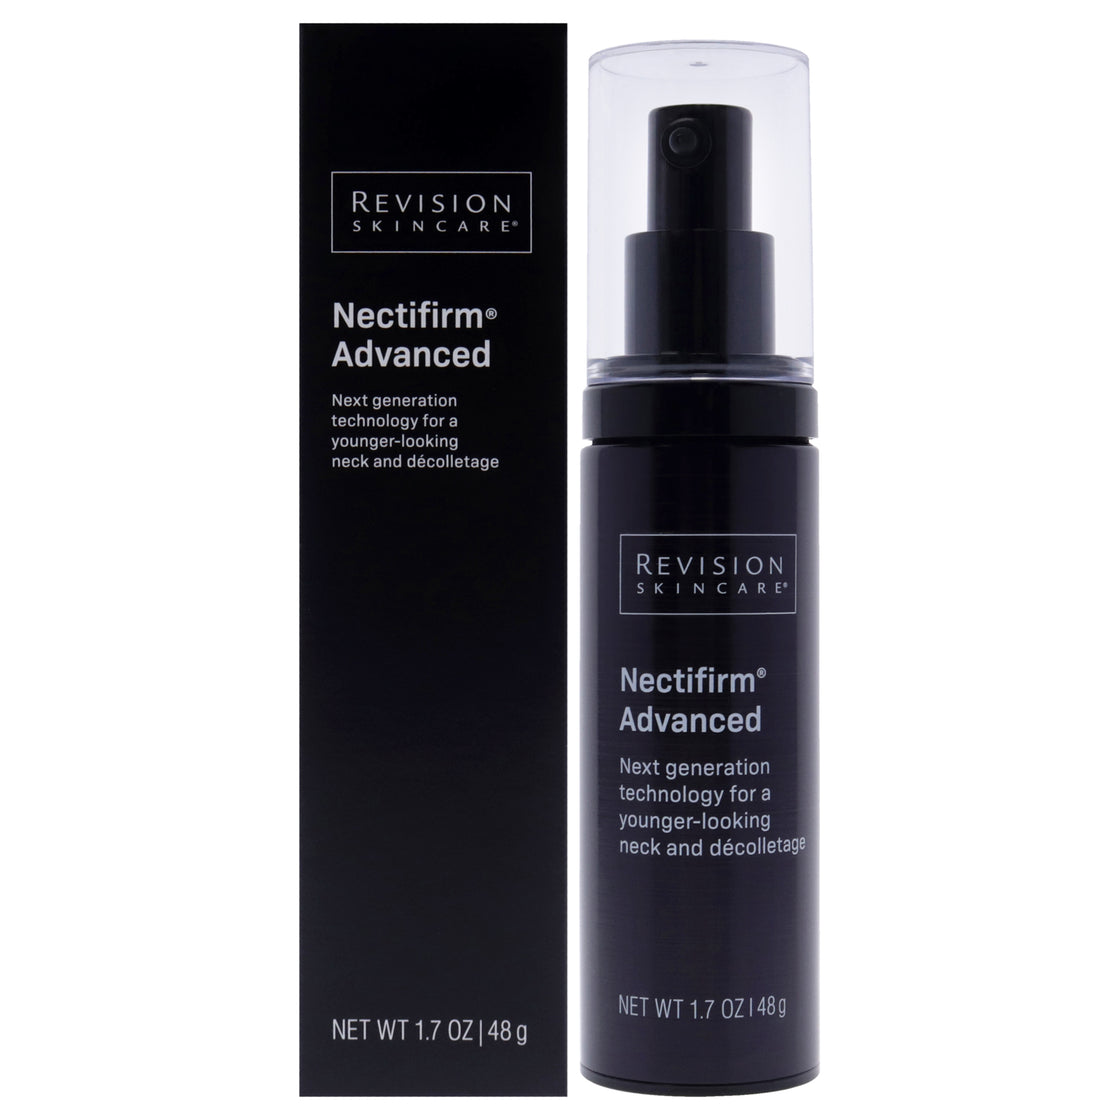 Nectifirm Advanced Cream by Revision for Unisex - 1.7 oz Cream